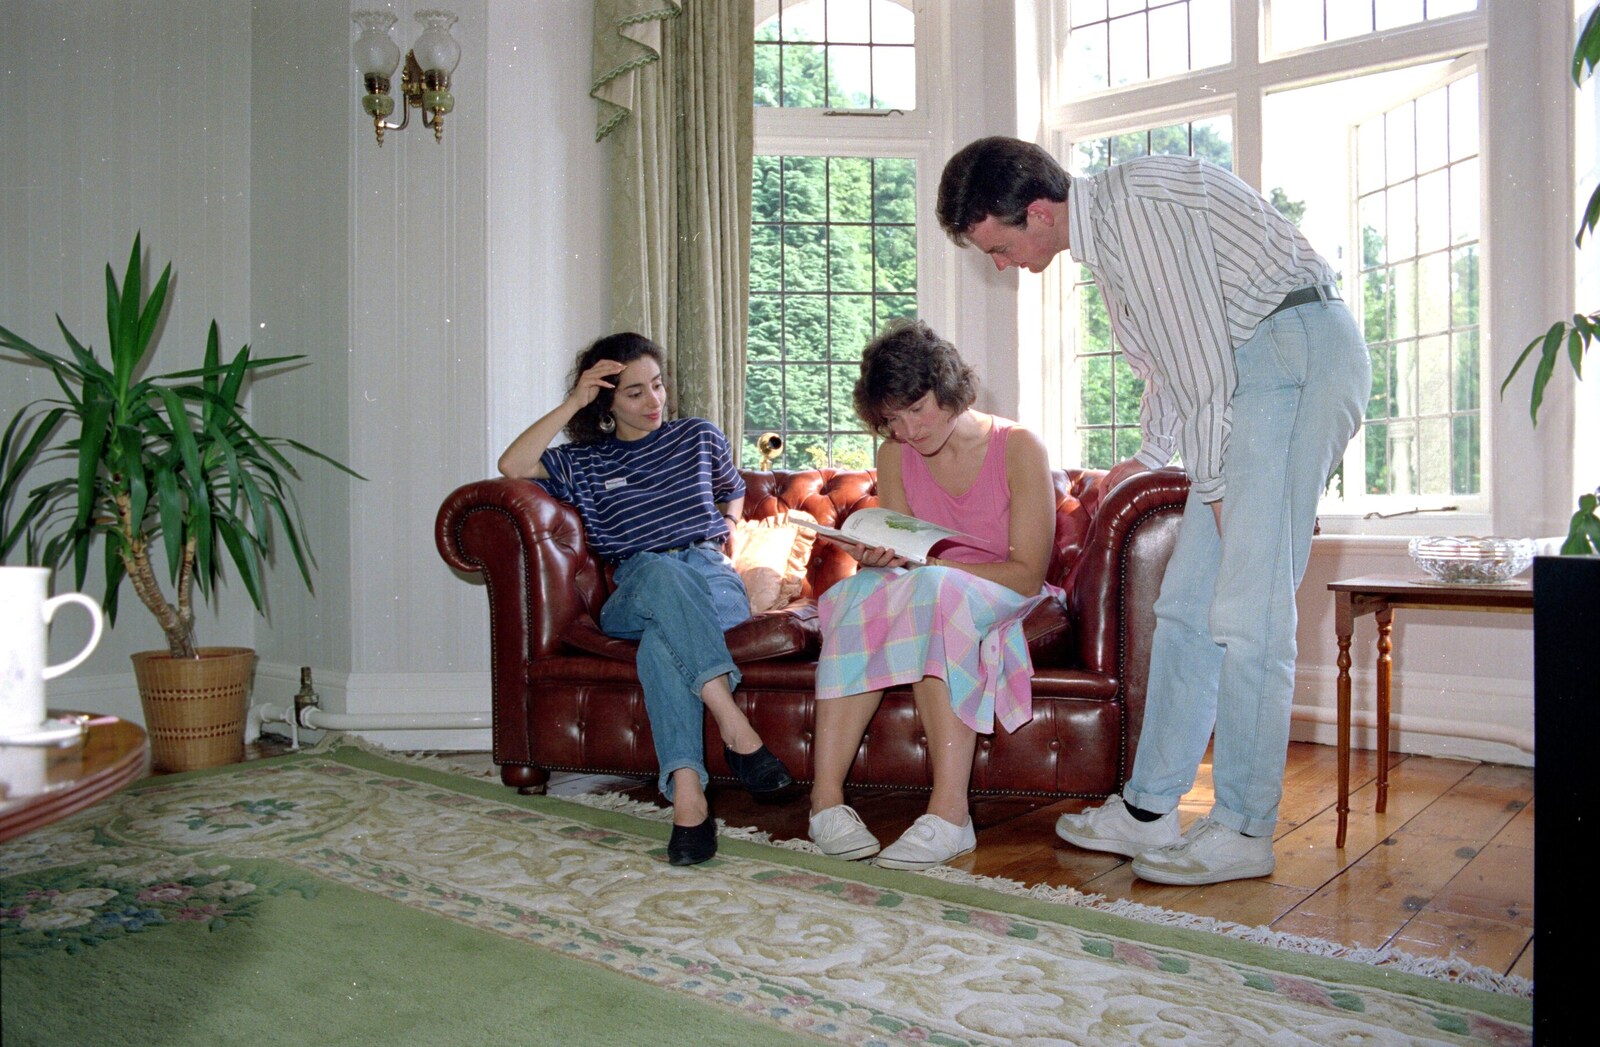 Angela reads something as Hoorie and John look on from Uni: Another Side of Student Life, Yelverton, Devon - 23rd June 1989